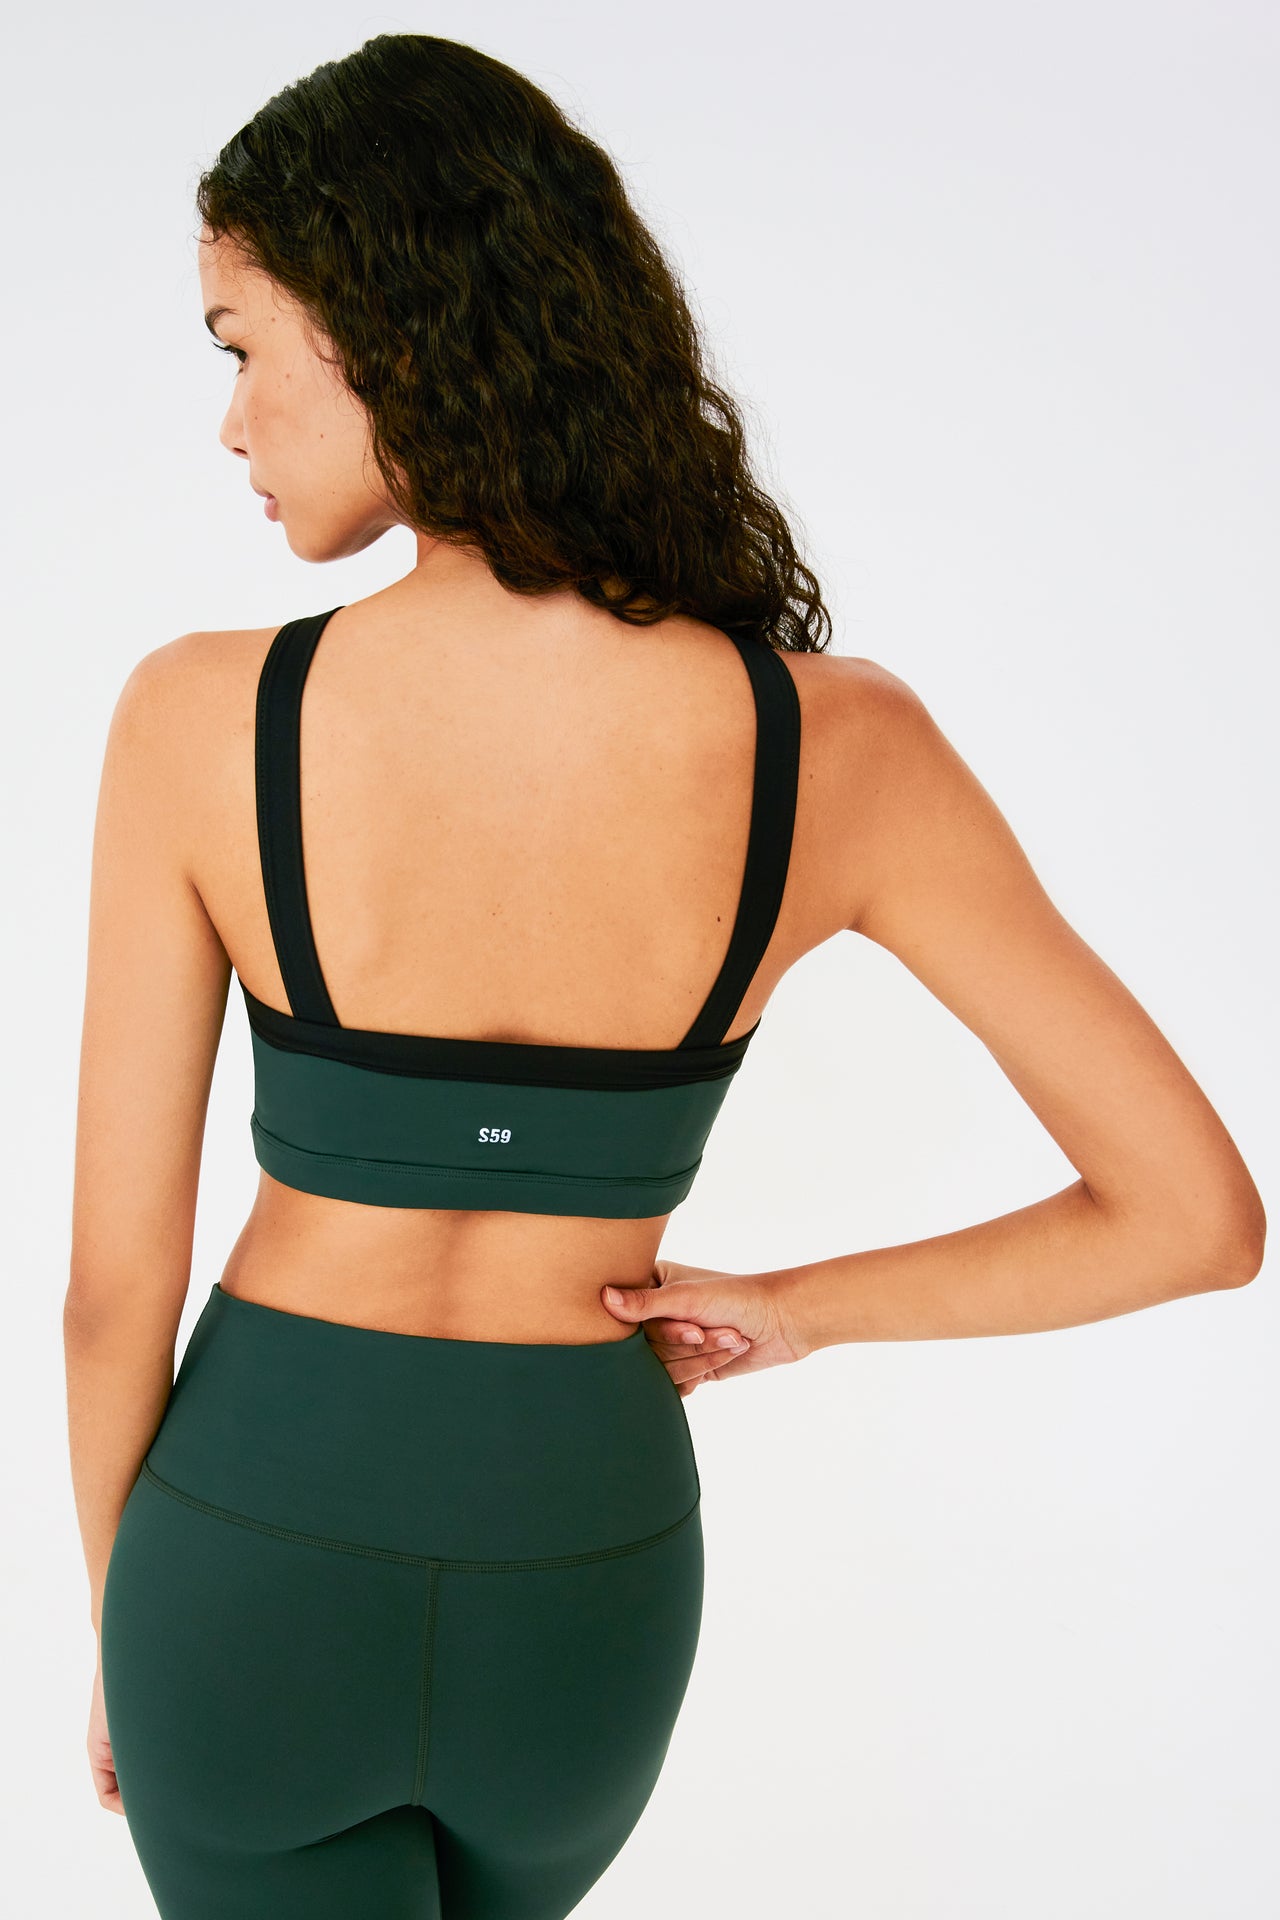 Back view of woman with dark wavy hair wearing a dark green bra with thick black straps and white S59 logo and dark green leggings